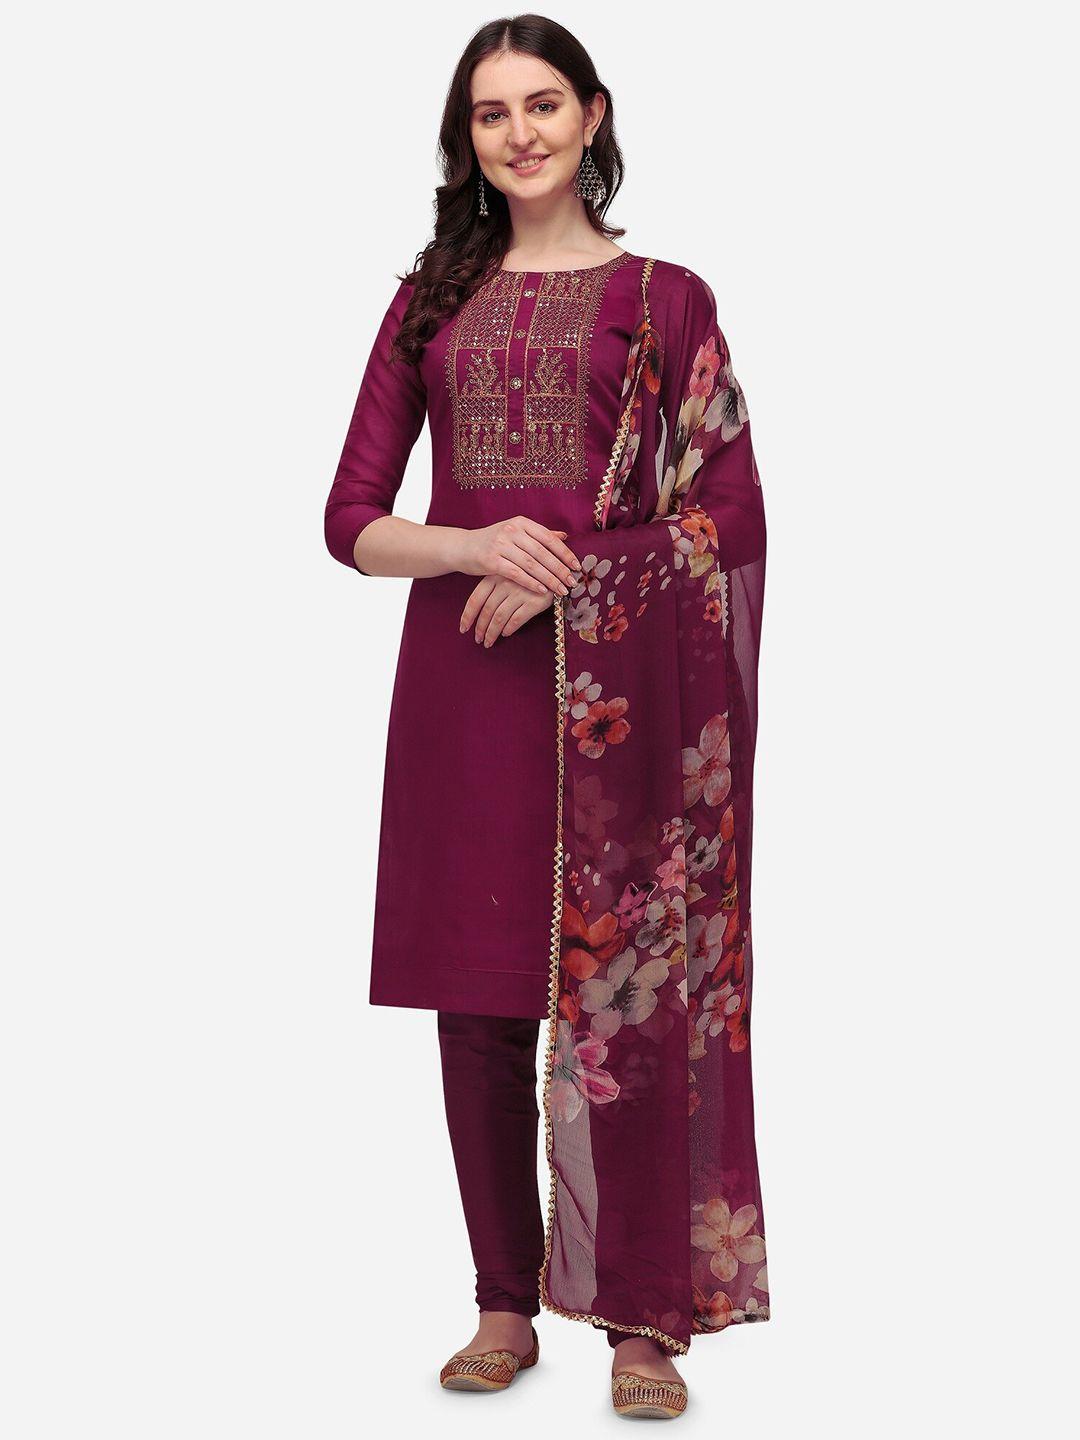 rajgranth-women-purple-&-gold-geometric-embroidered-unstitched-dress-material